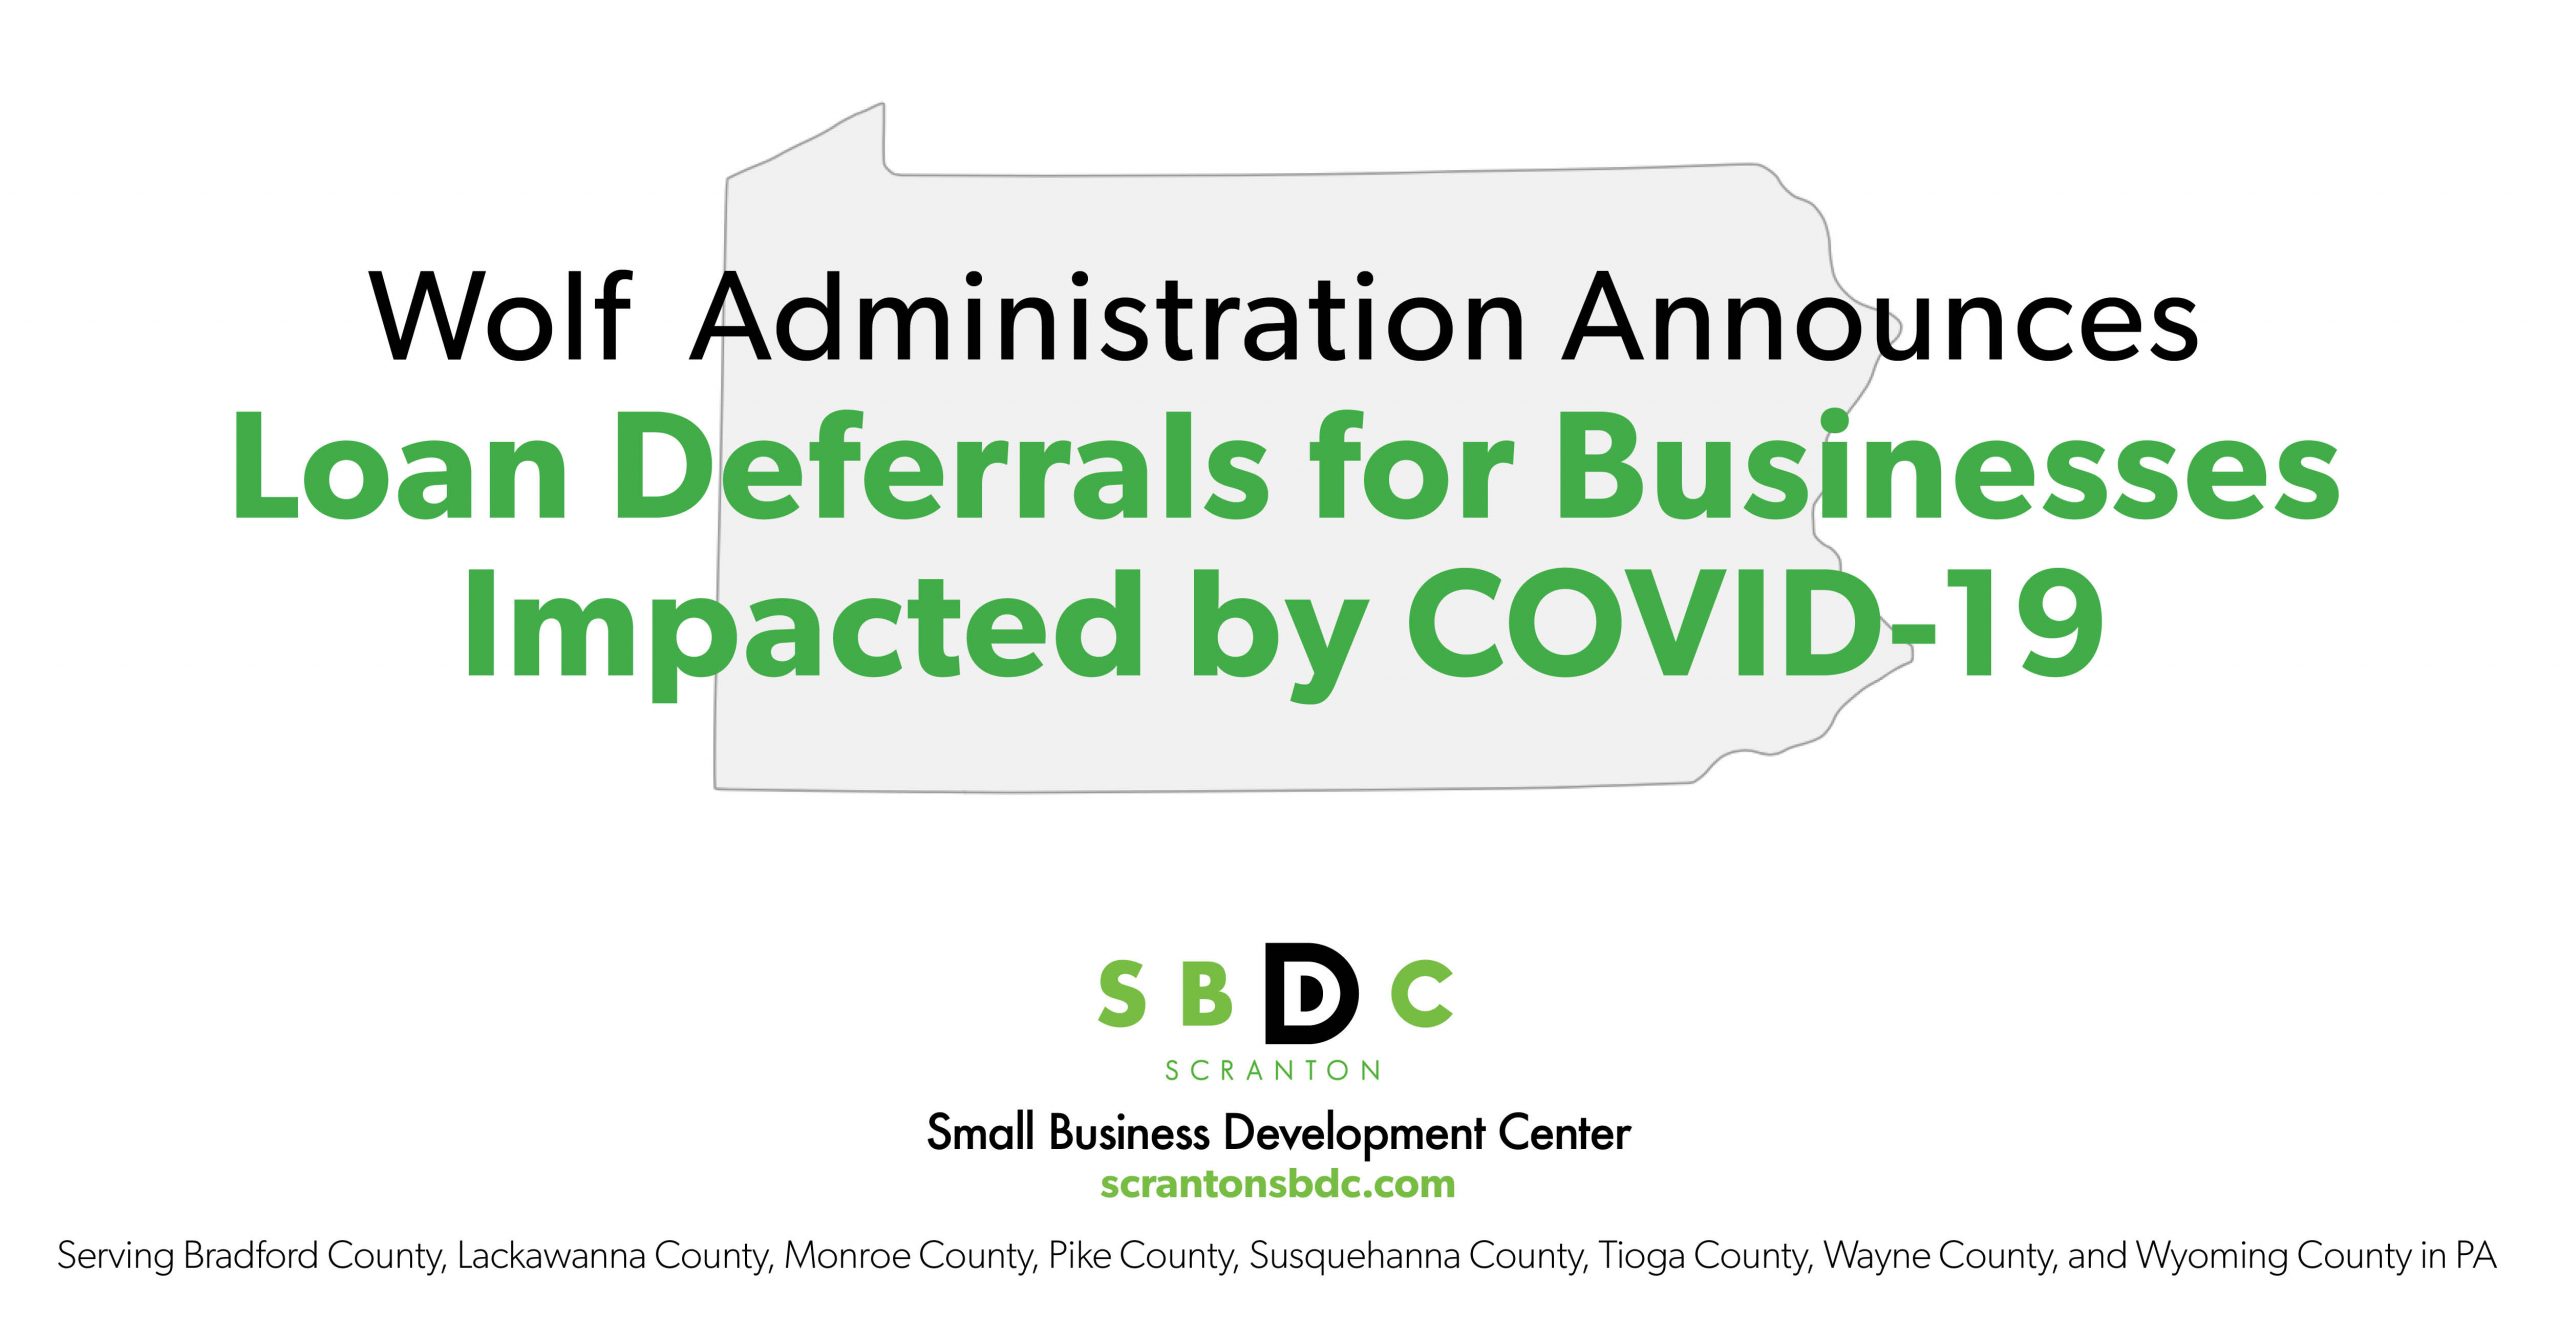 You are currently viewing Wolf Administration Announces Loan Deferrals for Businesses Impacted by COVID-19 